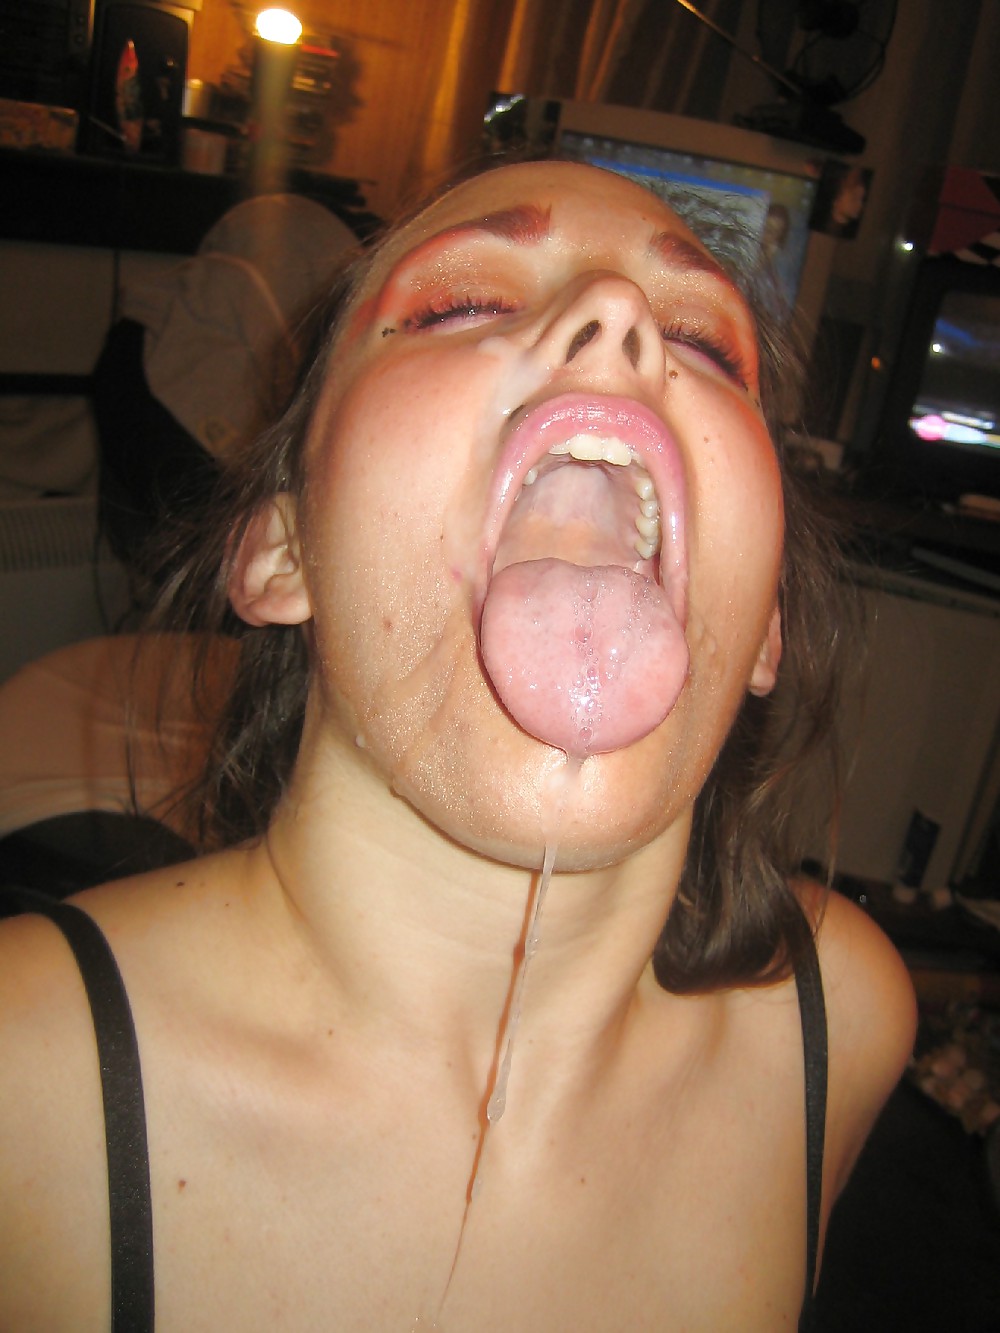 Cumshots in her open mouth - N. C. porn gallery